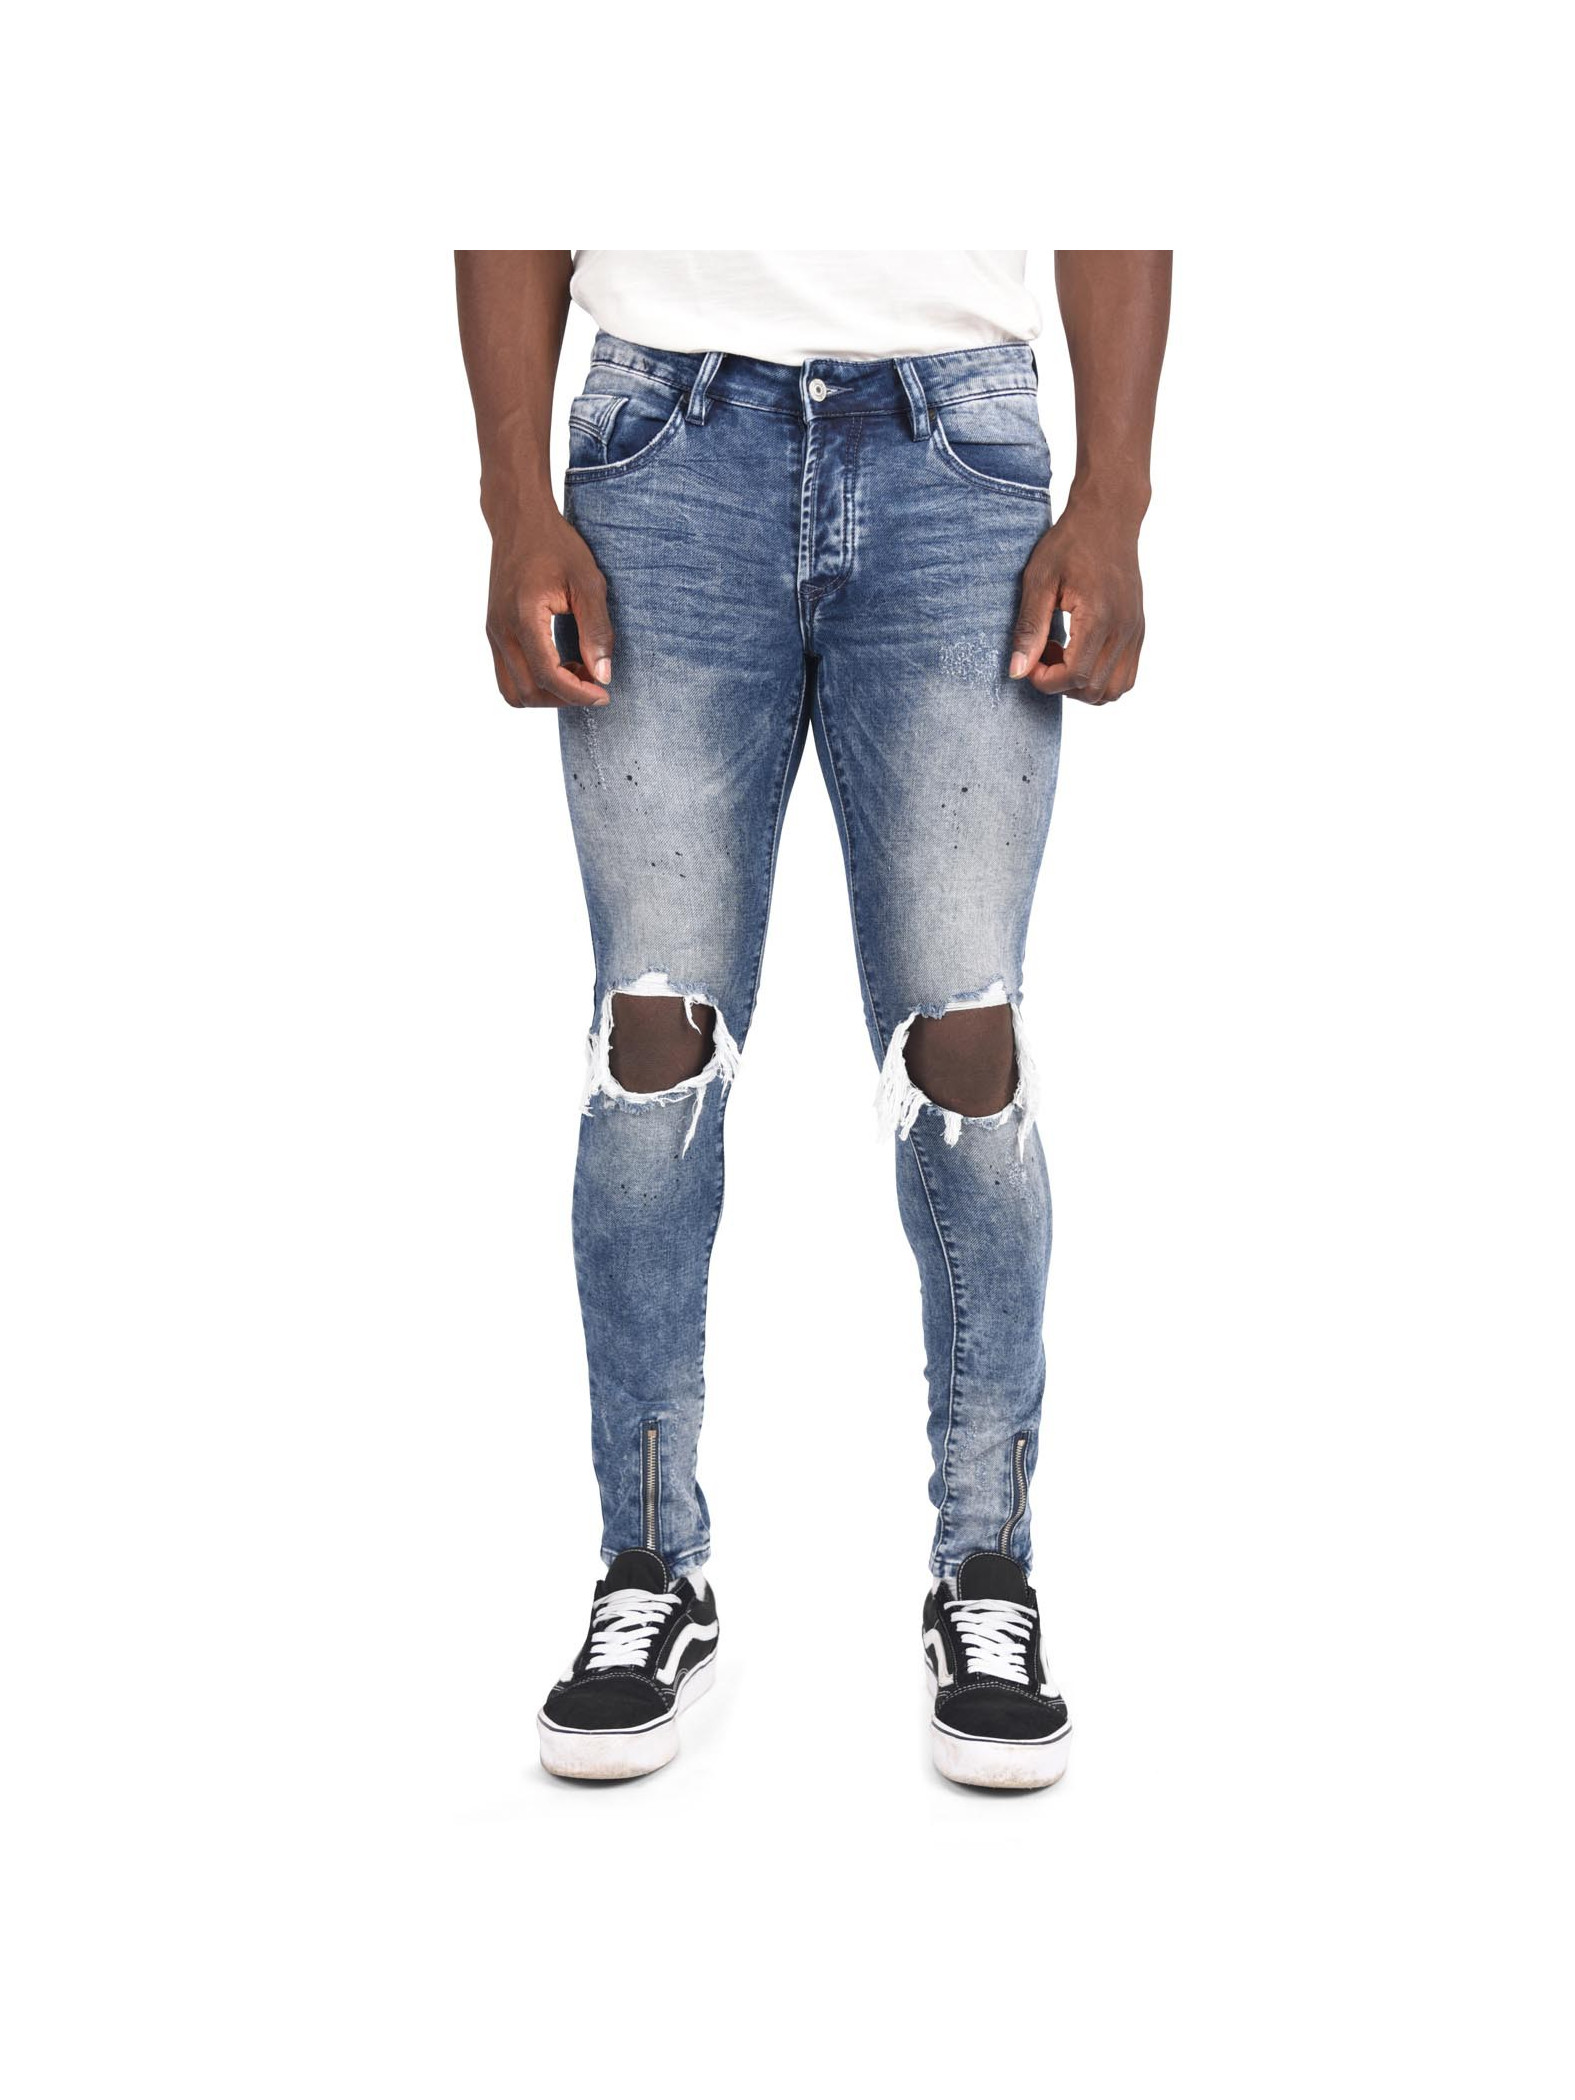 Men's Skinny Ripped Jeans in Grey Project X Paris